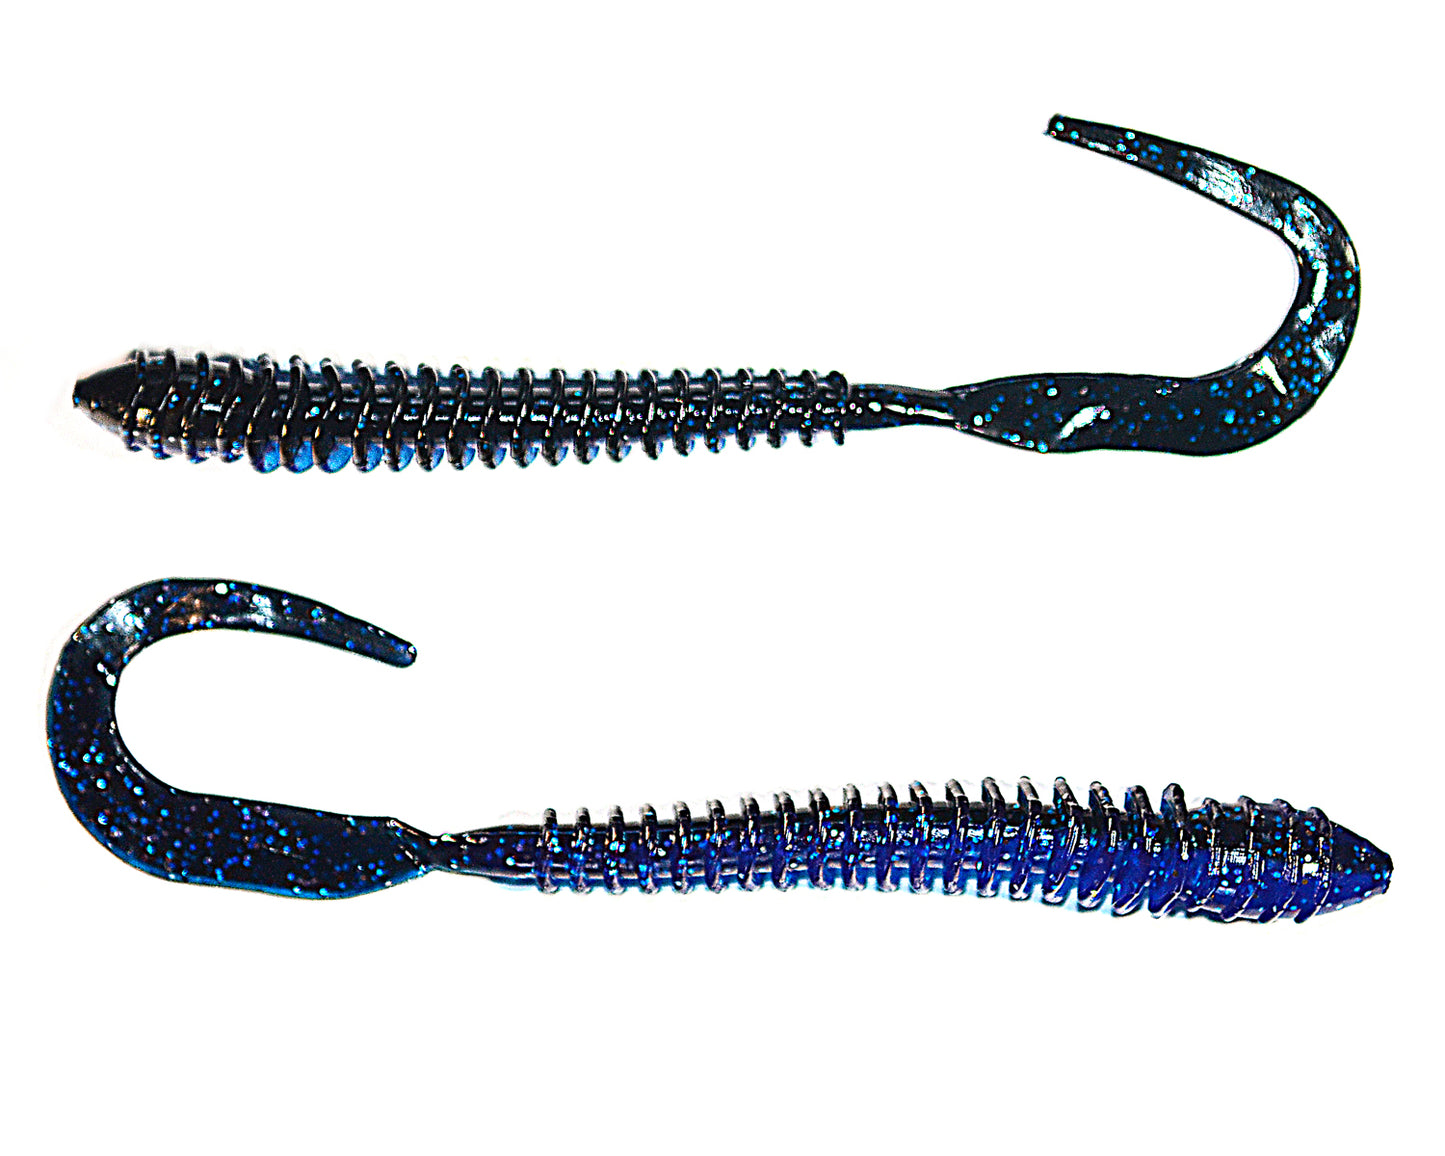 Riot Baits The Synth Worm 10pk